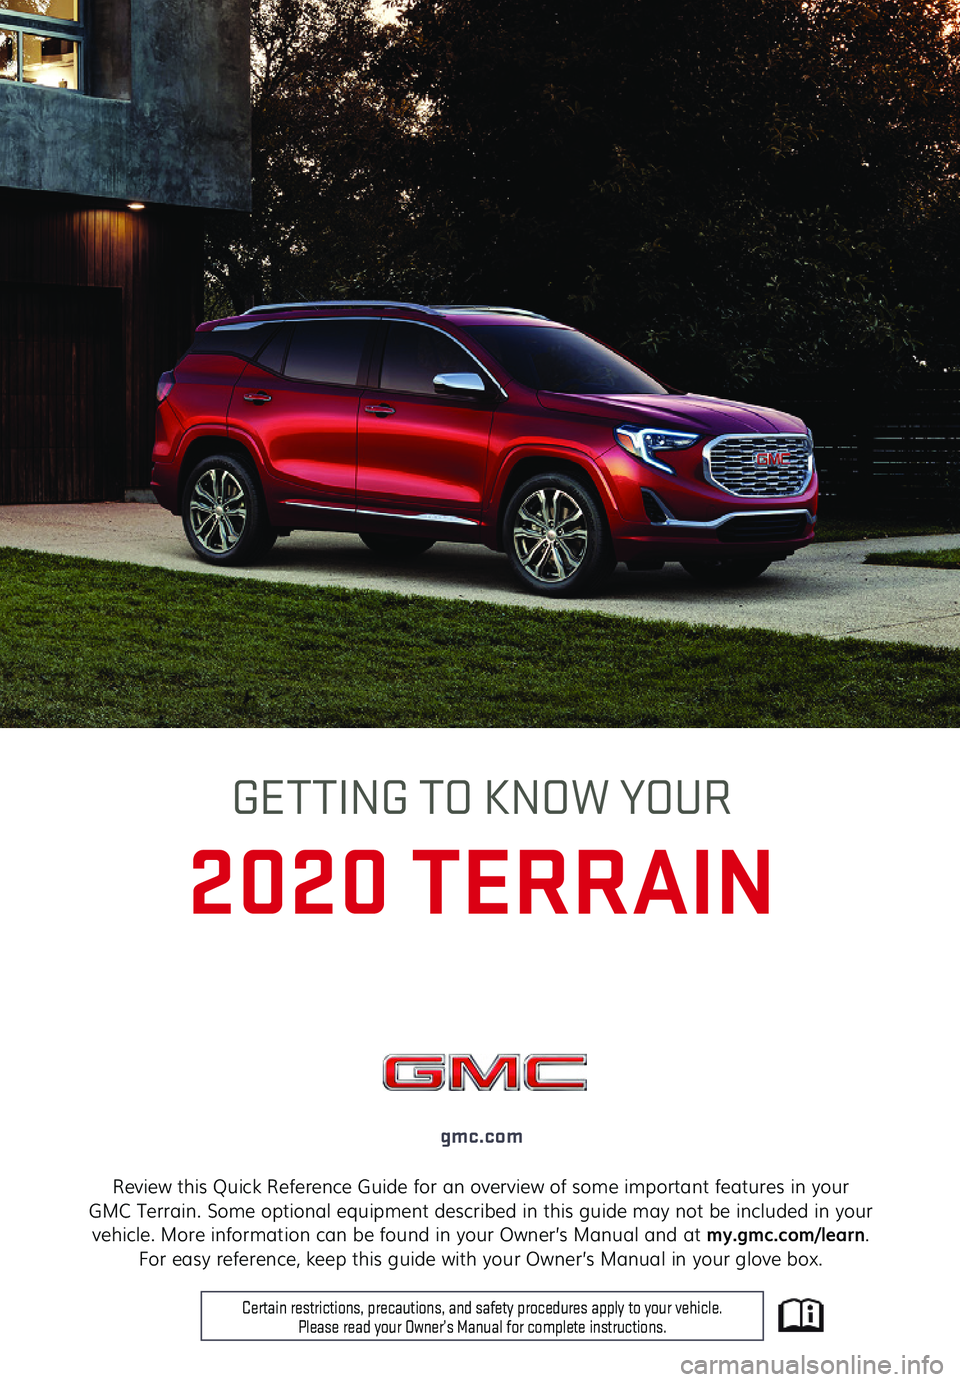 GMC TERRAIN 2020  Get To Know Guide 1
Review this Quick Reference Guide for an overview of some important features in your  GMC Terrain. Some optional equipment described in this guide may not be included in your vehicle. More informati